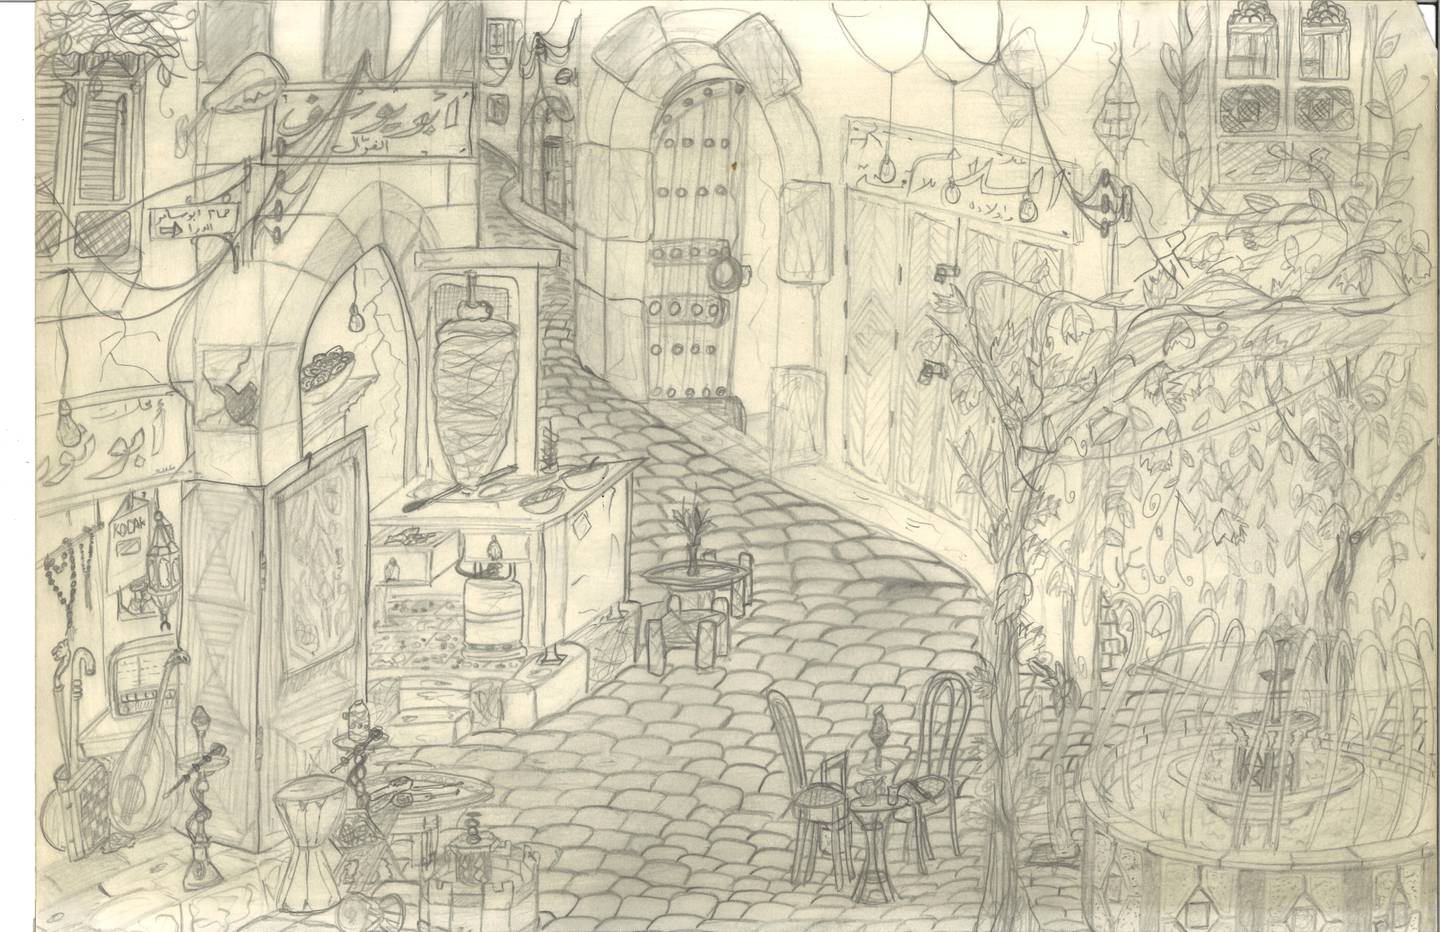 A childhood sketch by Mohamad Hafez, who was so entranced by the world’s oldest continuously inhabited city as a teenager that he would wander its souqs and alleyways with pencil and paper in hand at any available opportunity. Photo: Mohamad Hafez